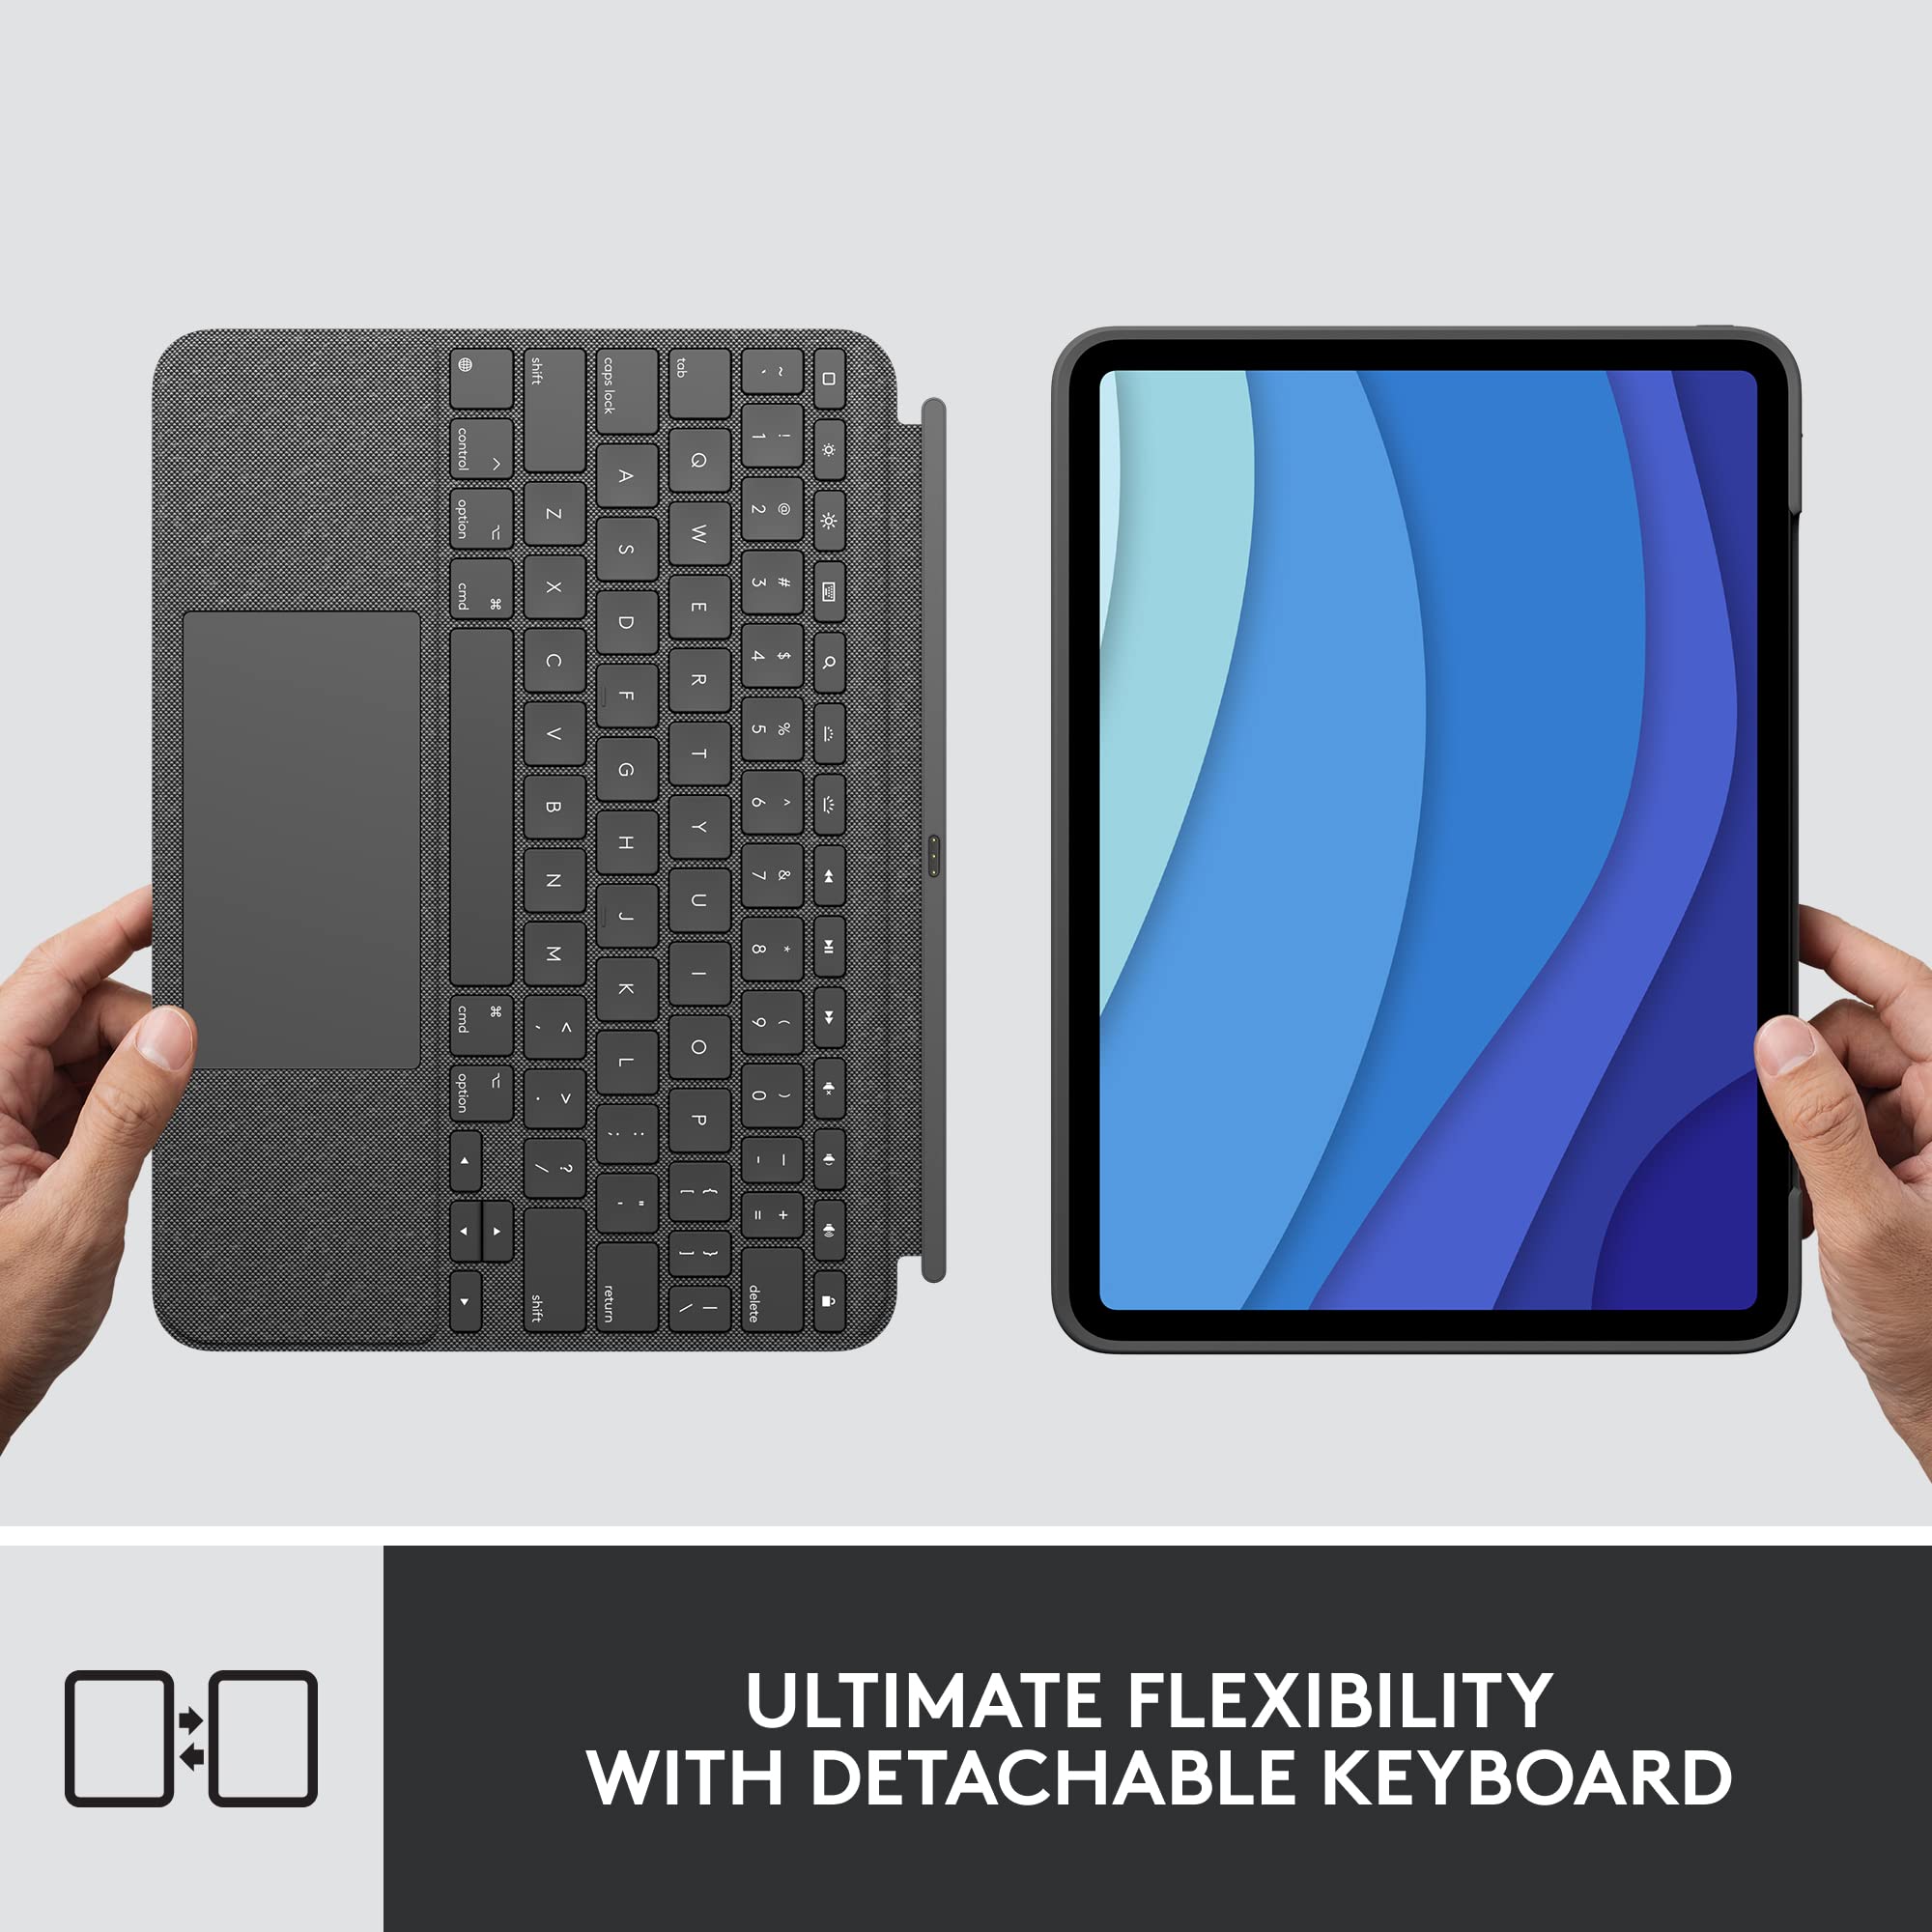 Logitech Combo Touch iPad Pro 11-inch (1st, 2nd, 3rd, 4th gen - 2018, 2020, 2021, 2022) Keyboard Case Oxford Gray Crayon Gray Digital Pencil for All iPads (2018 Releases and Later)